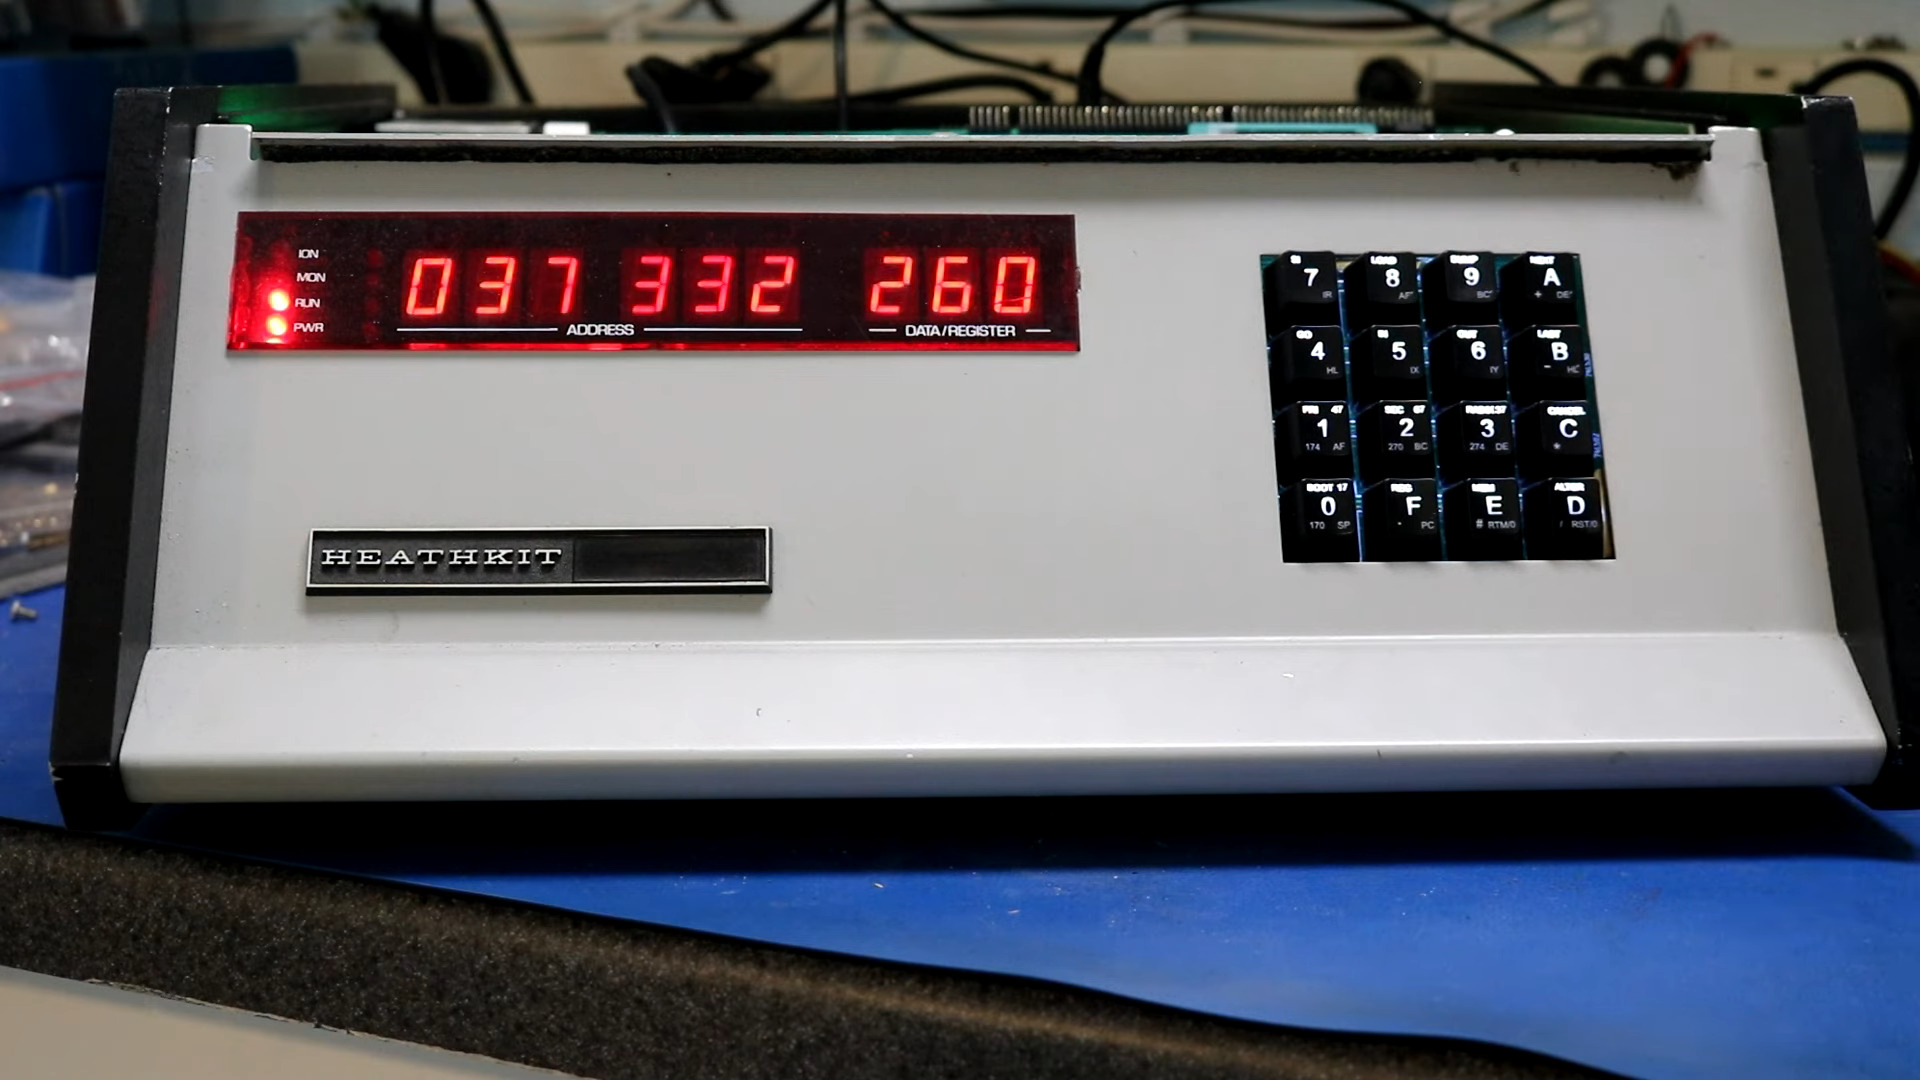 Downgrade Your Heathkit H8 To The World’s First 8-bit Microprocessor